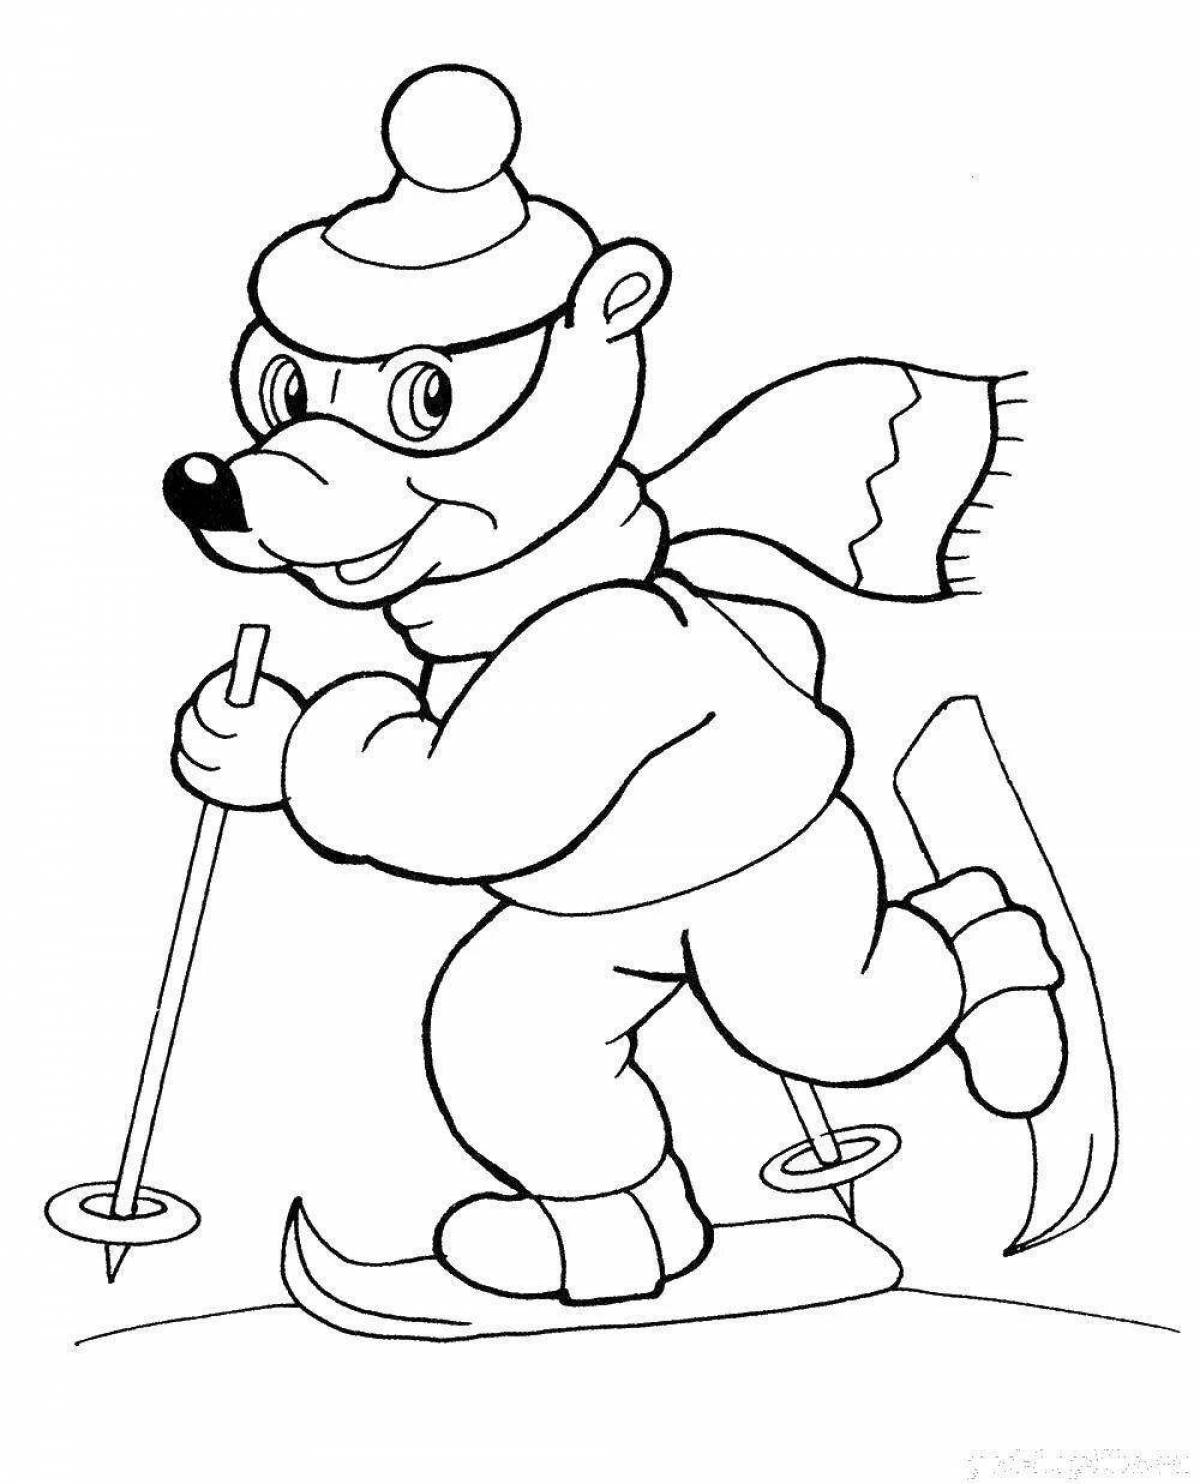 Adorable bear on skis coloring book